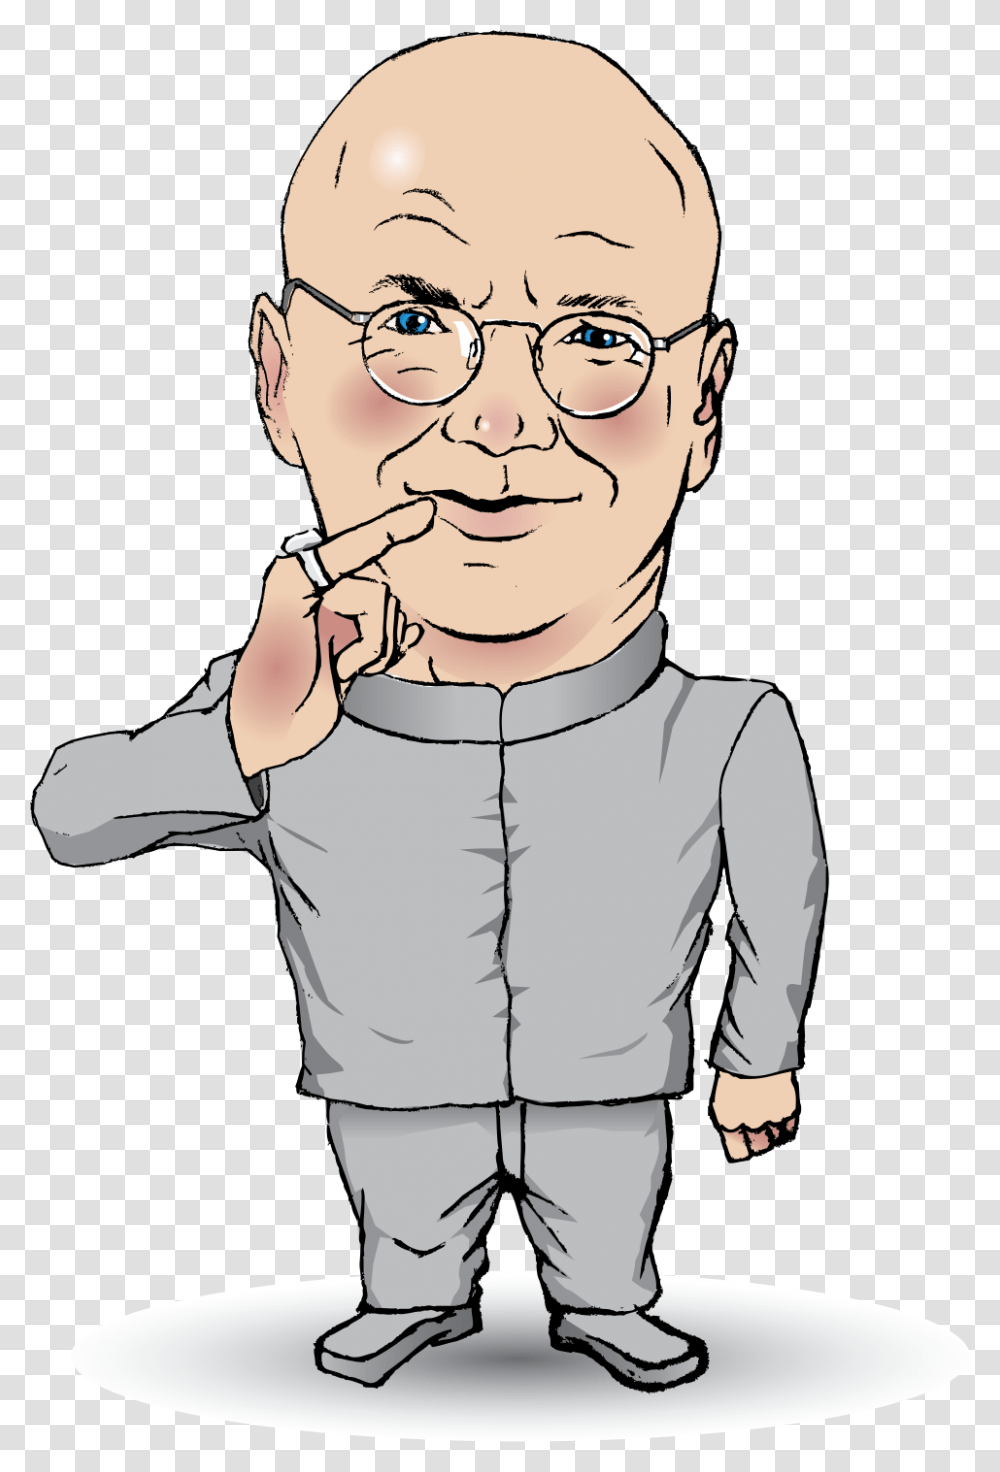 Man Person Google Search Free Vector Graphic On Pixabay Cartoon Doctor Evil, Clothing, Face, Glasses, Jaw Transparent Png